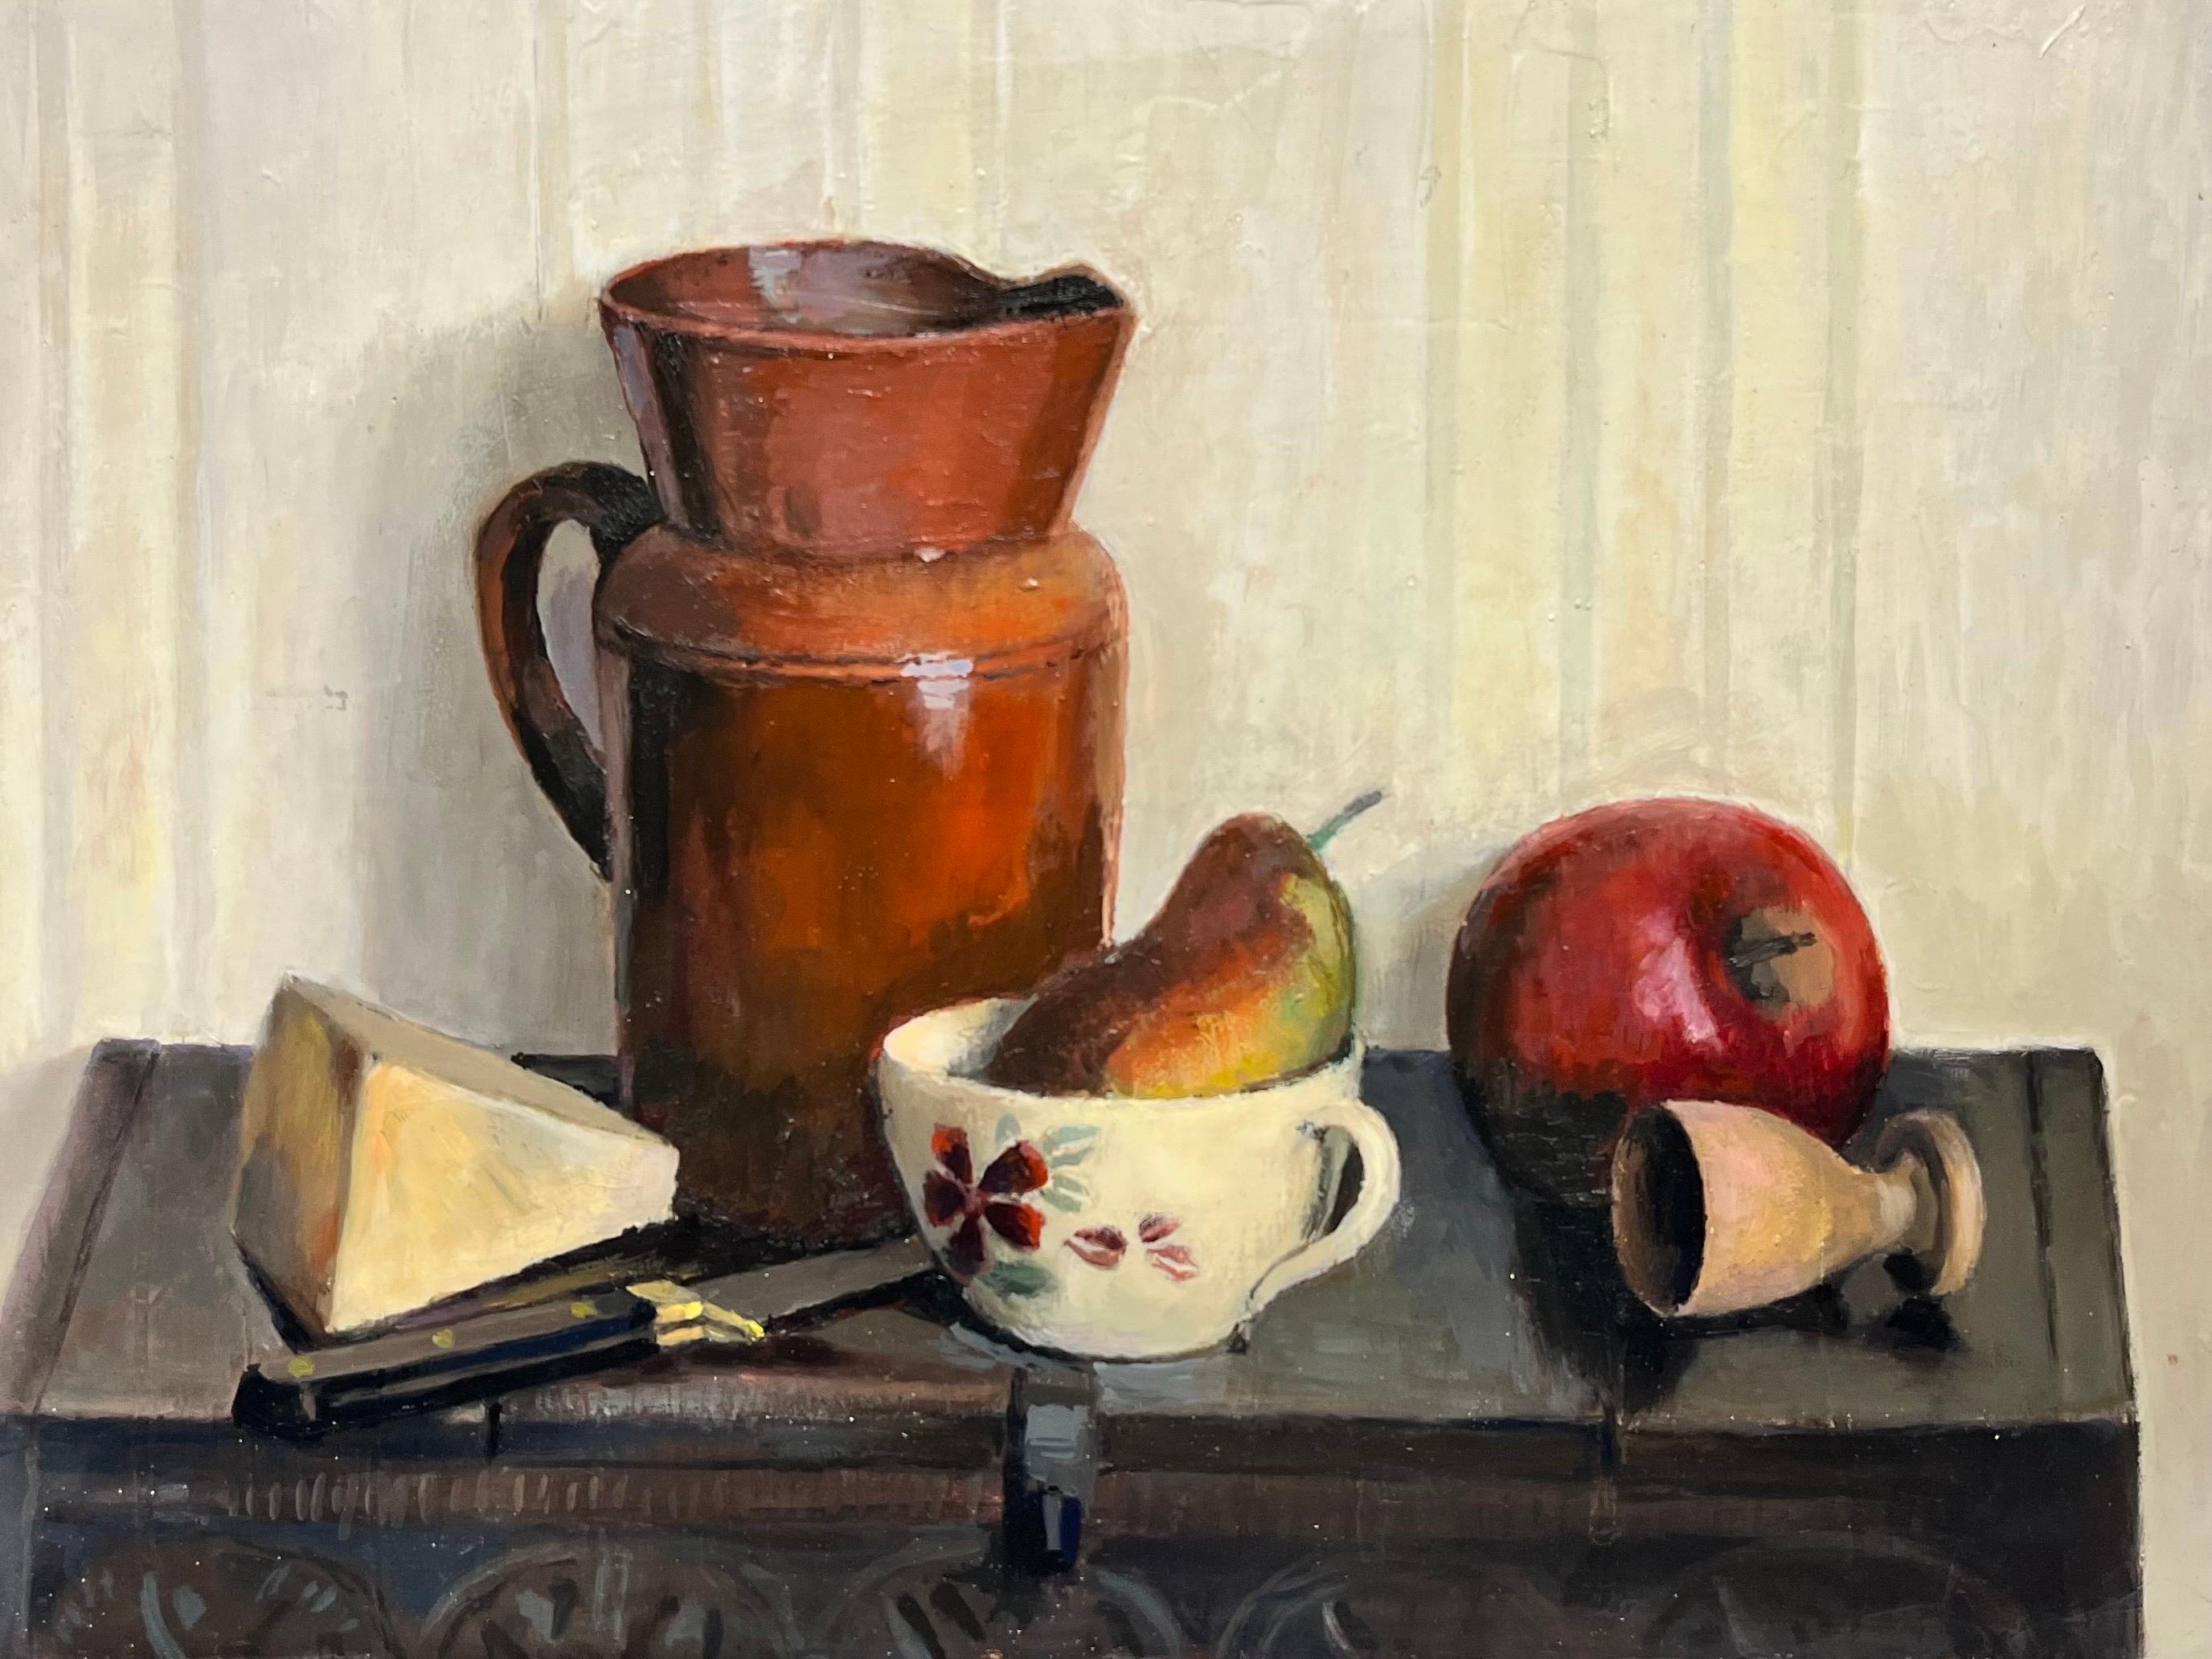 Fine French Still Life Interior Scene Fruit & Table Top Items, Beautiful Details - Painting by 20th Century French